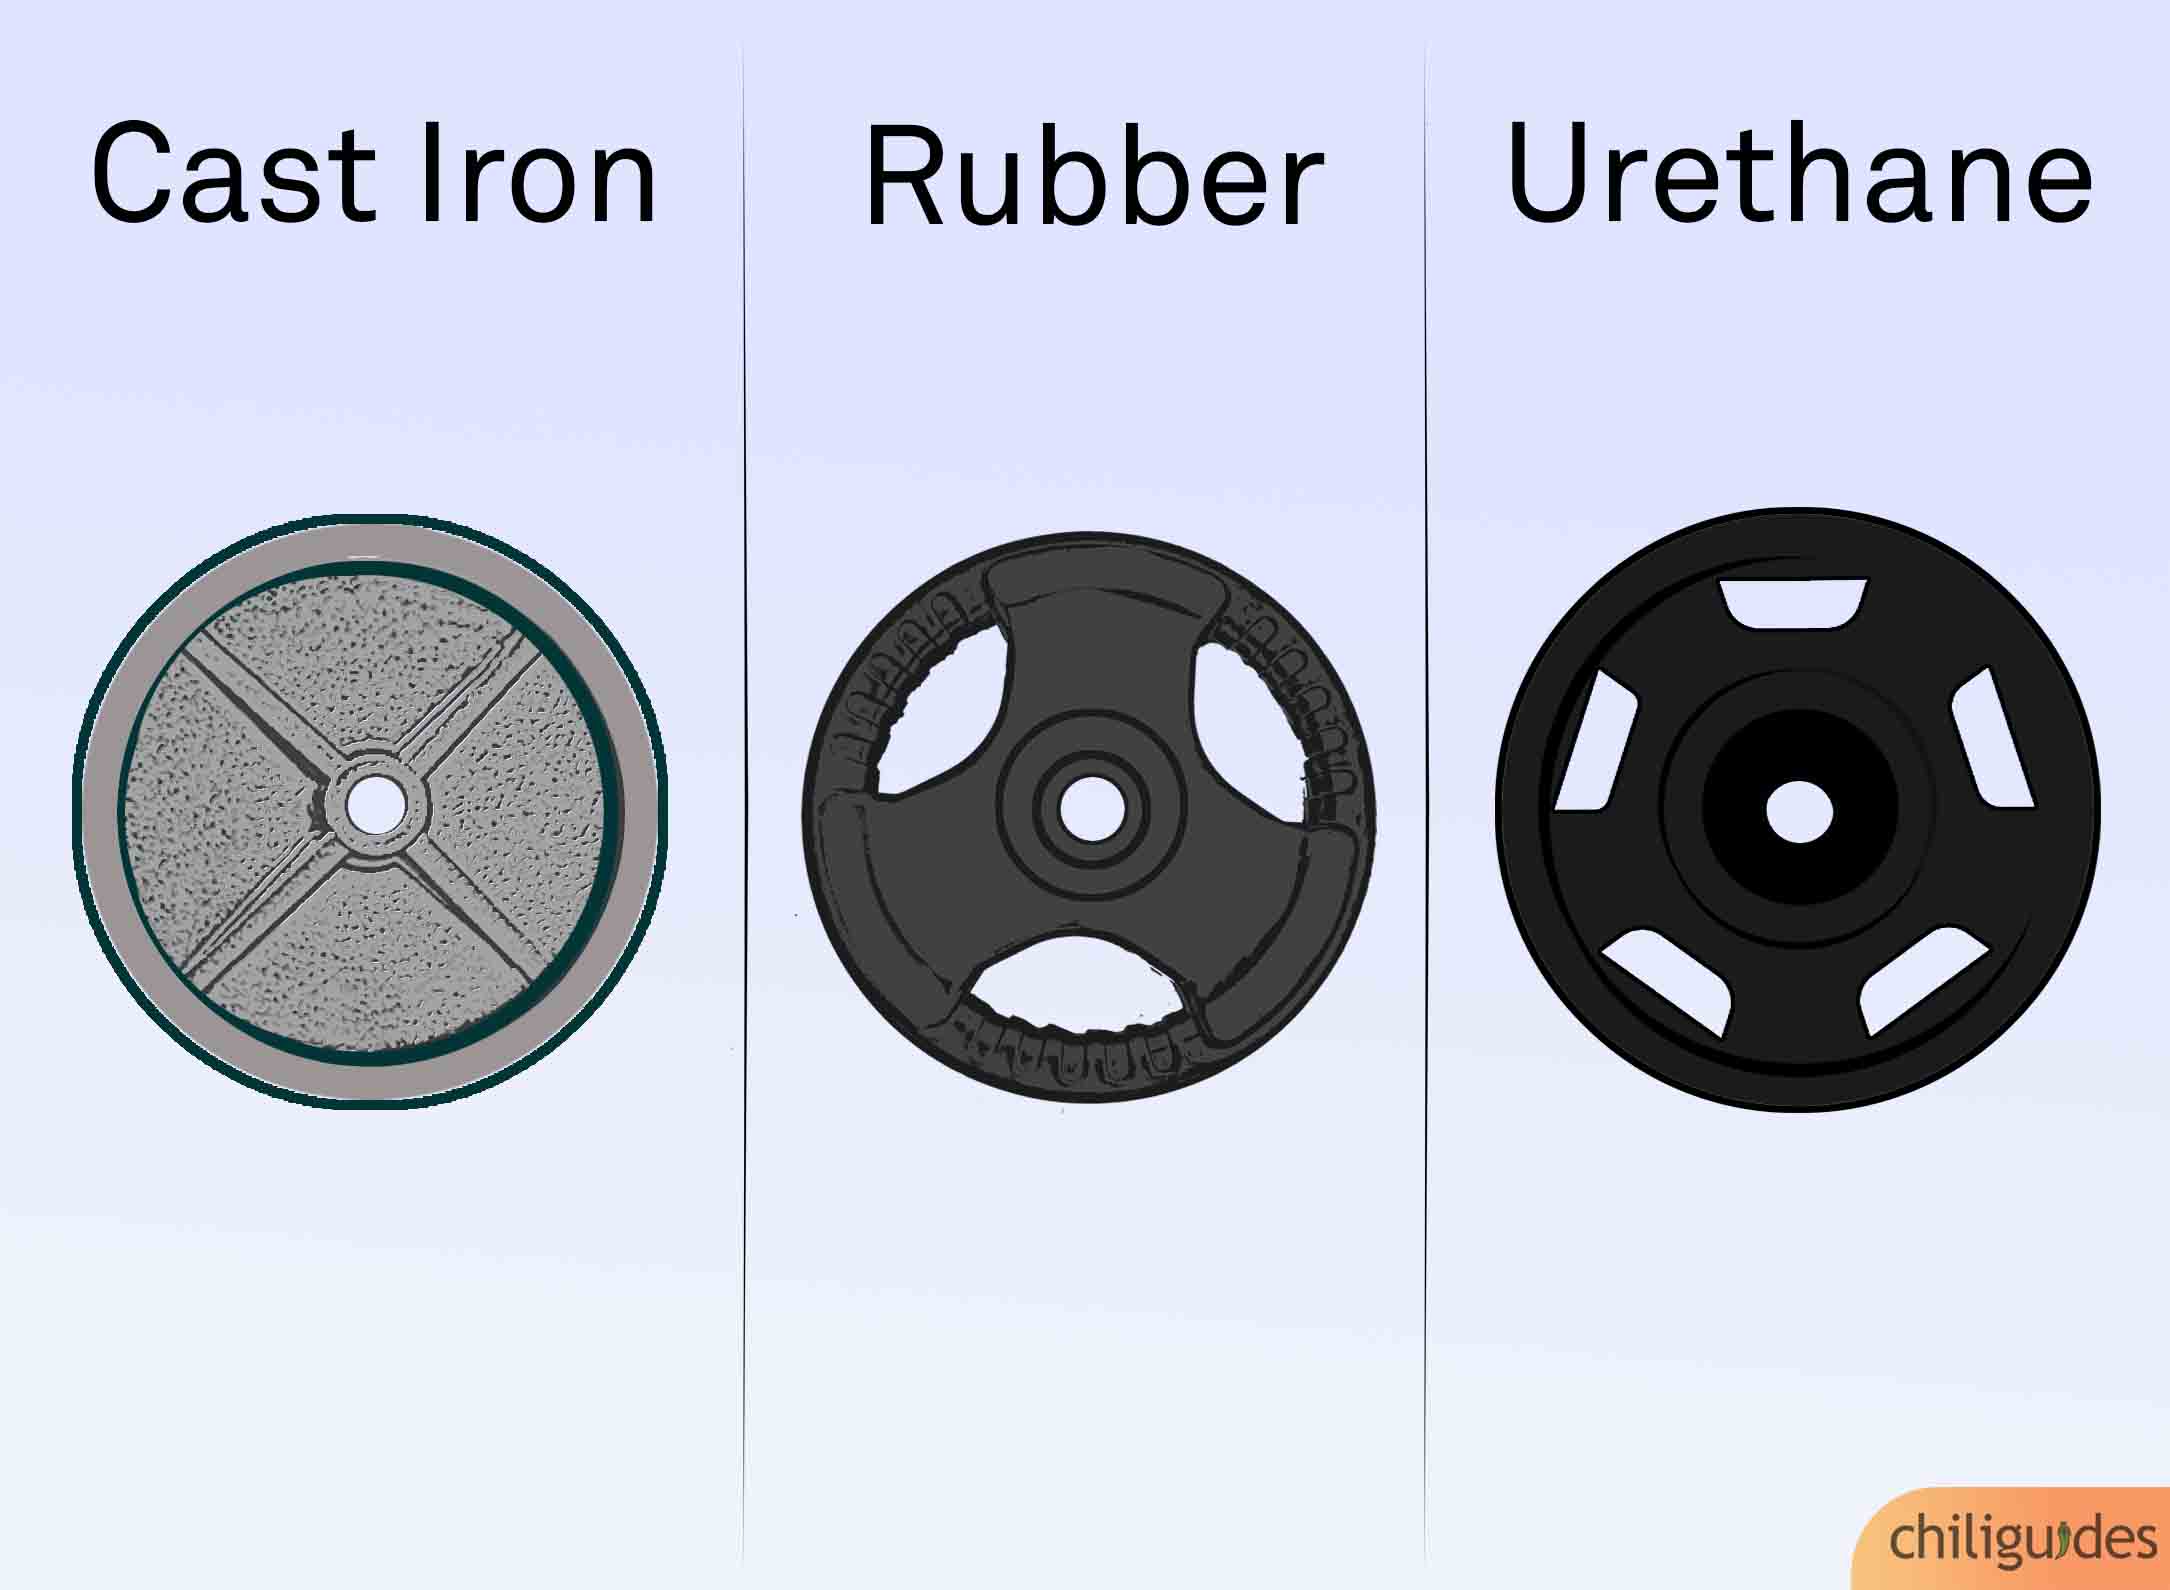 Weight plate’s prices differ based on their material.